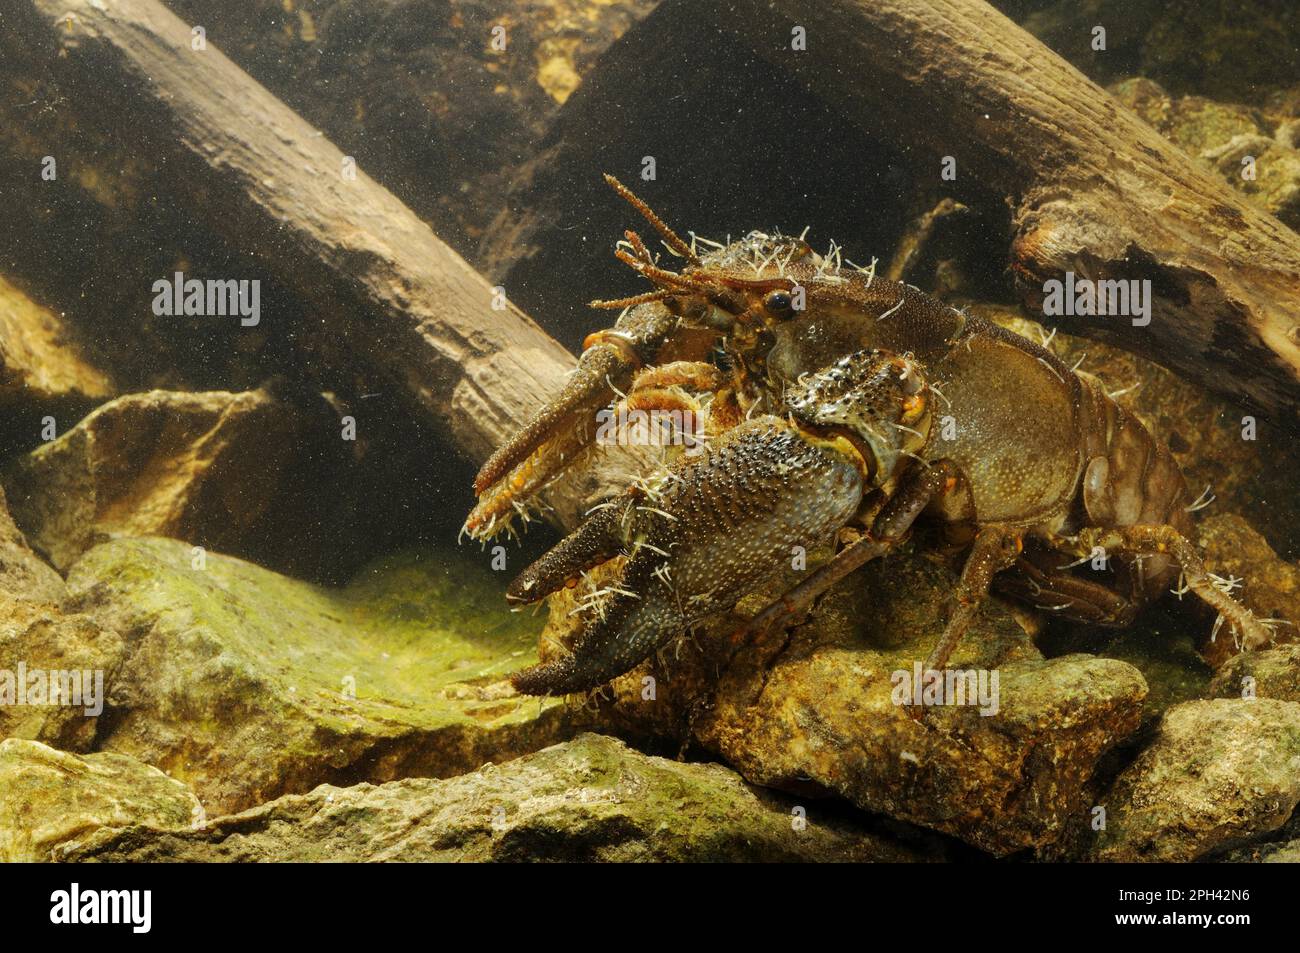 White-clawed Freshwater Crayfish (Austropotamobius italicus) adult male, with Parasitic Annelid (Branchiobdella astaci) ectoparasites attached, Italy Stock Photo